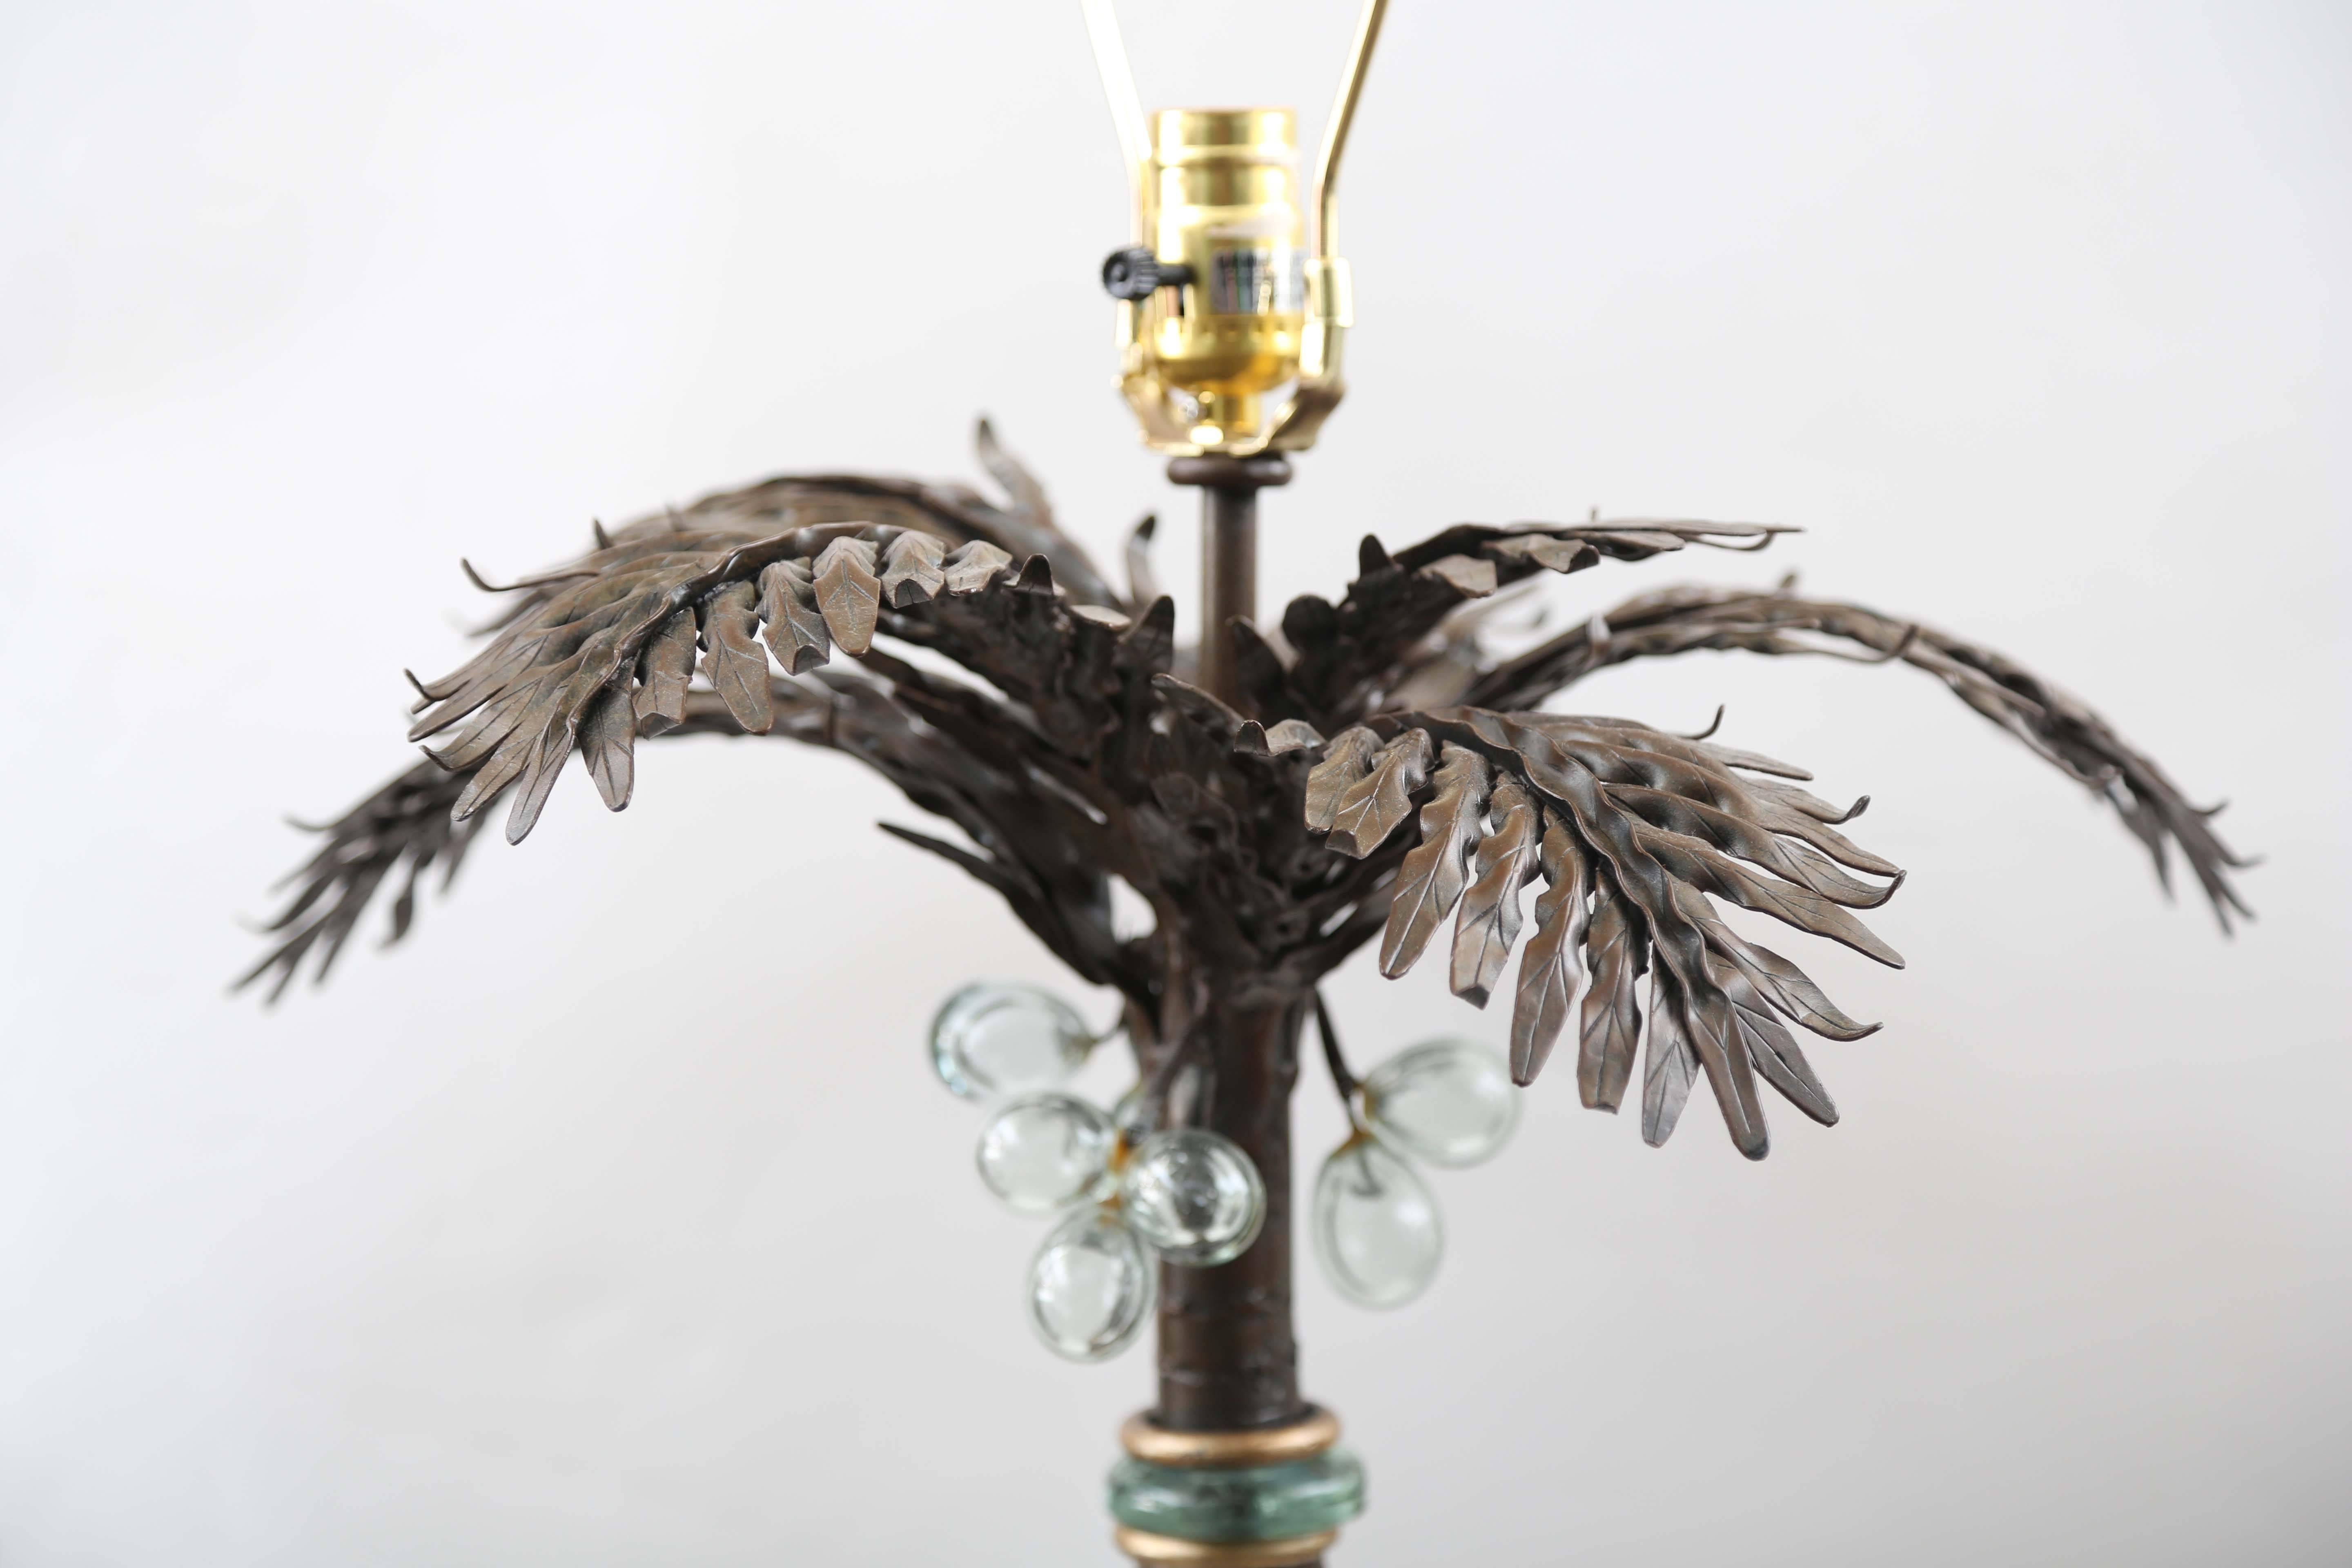 Stunning pair of bronze palm tree lamps wrapped in cord and adorned with aqua glass coconuts.